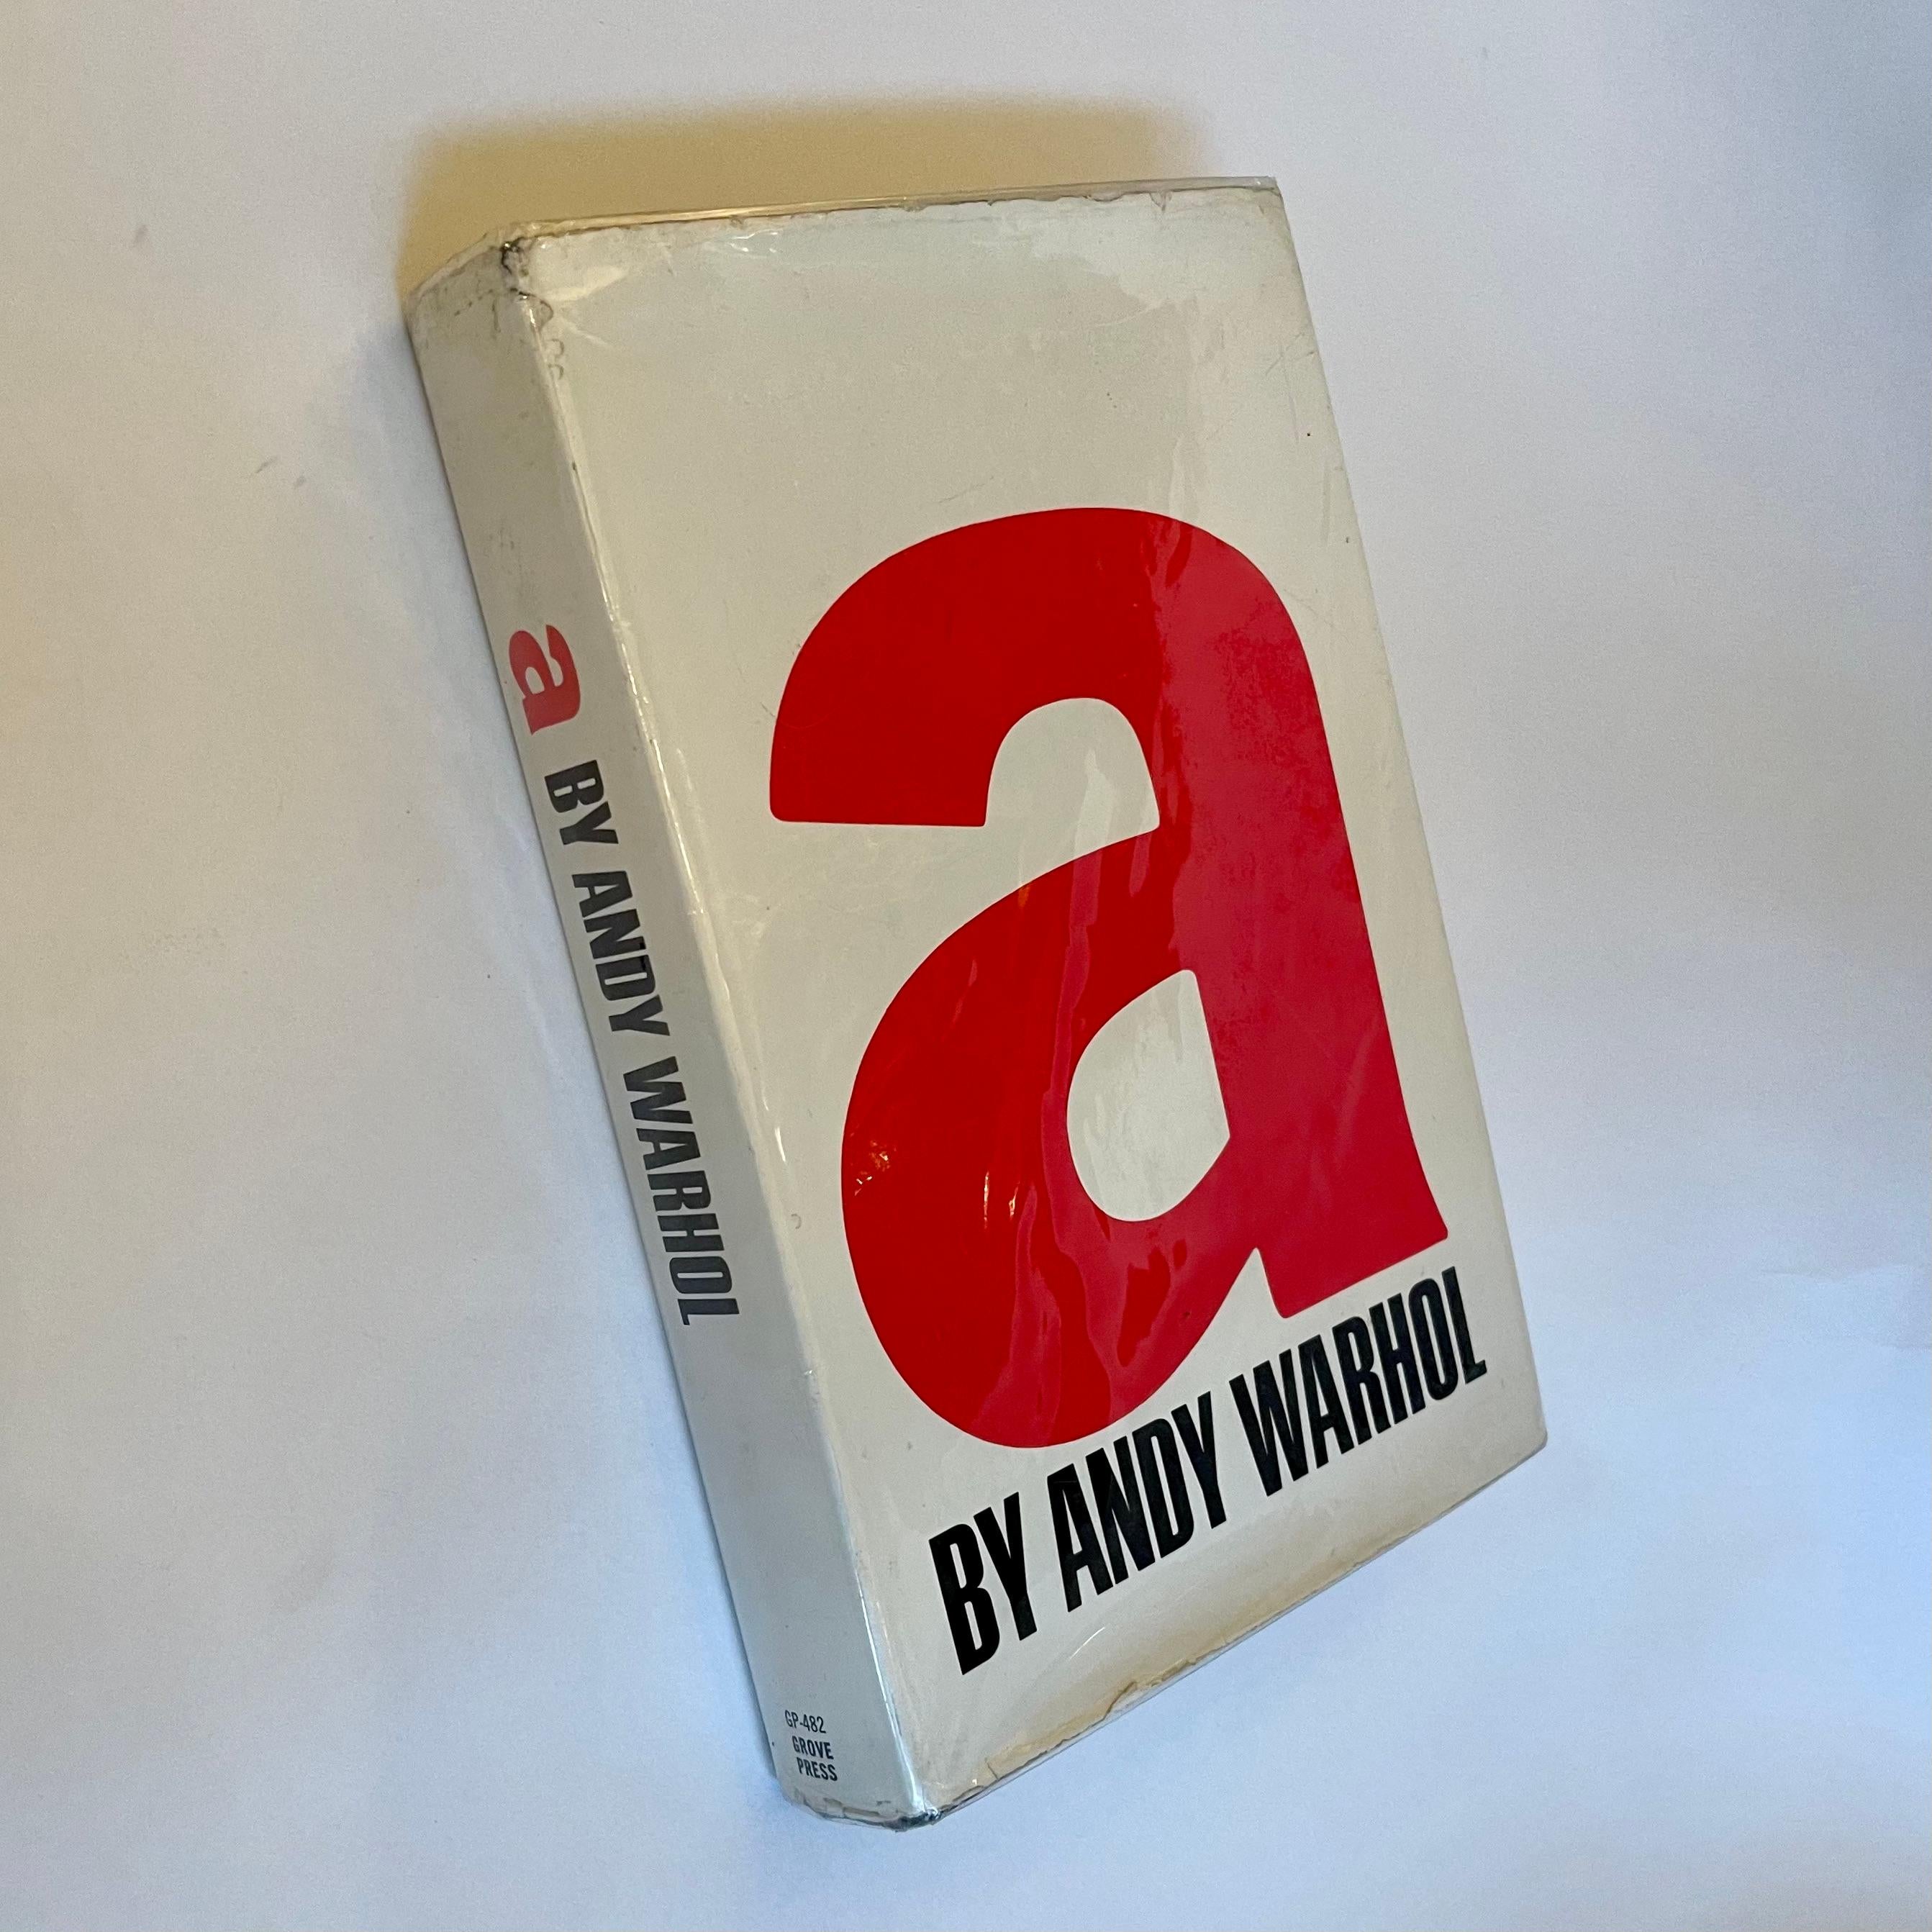 First Edition, published by Grove Press, New York, 1968.

This first edition, first printing of Andy Warhol's knowing and avant-garde experimental text, 'a, A Novel', was released by the collectible and forward-thinking Grove Press in 1968 in the